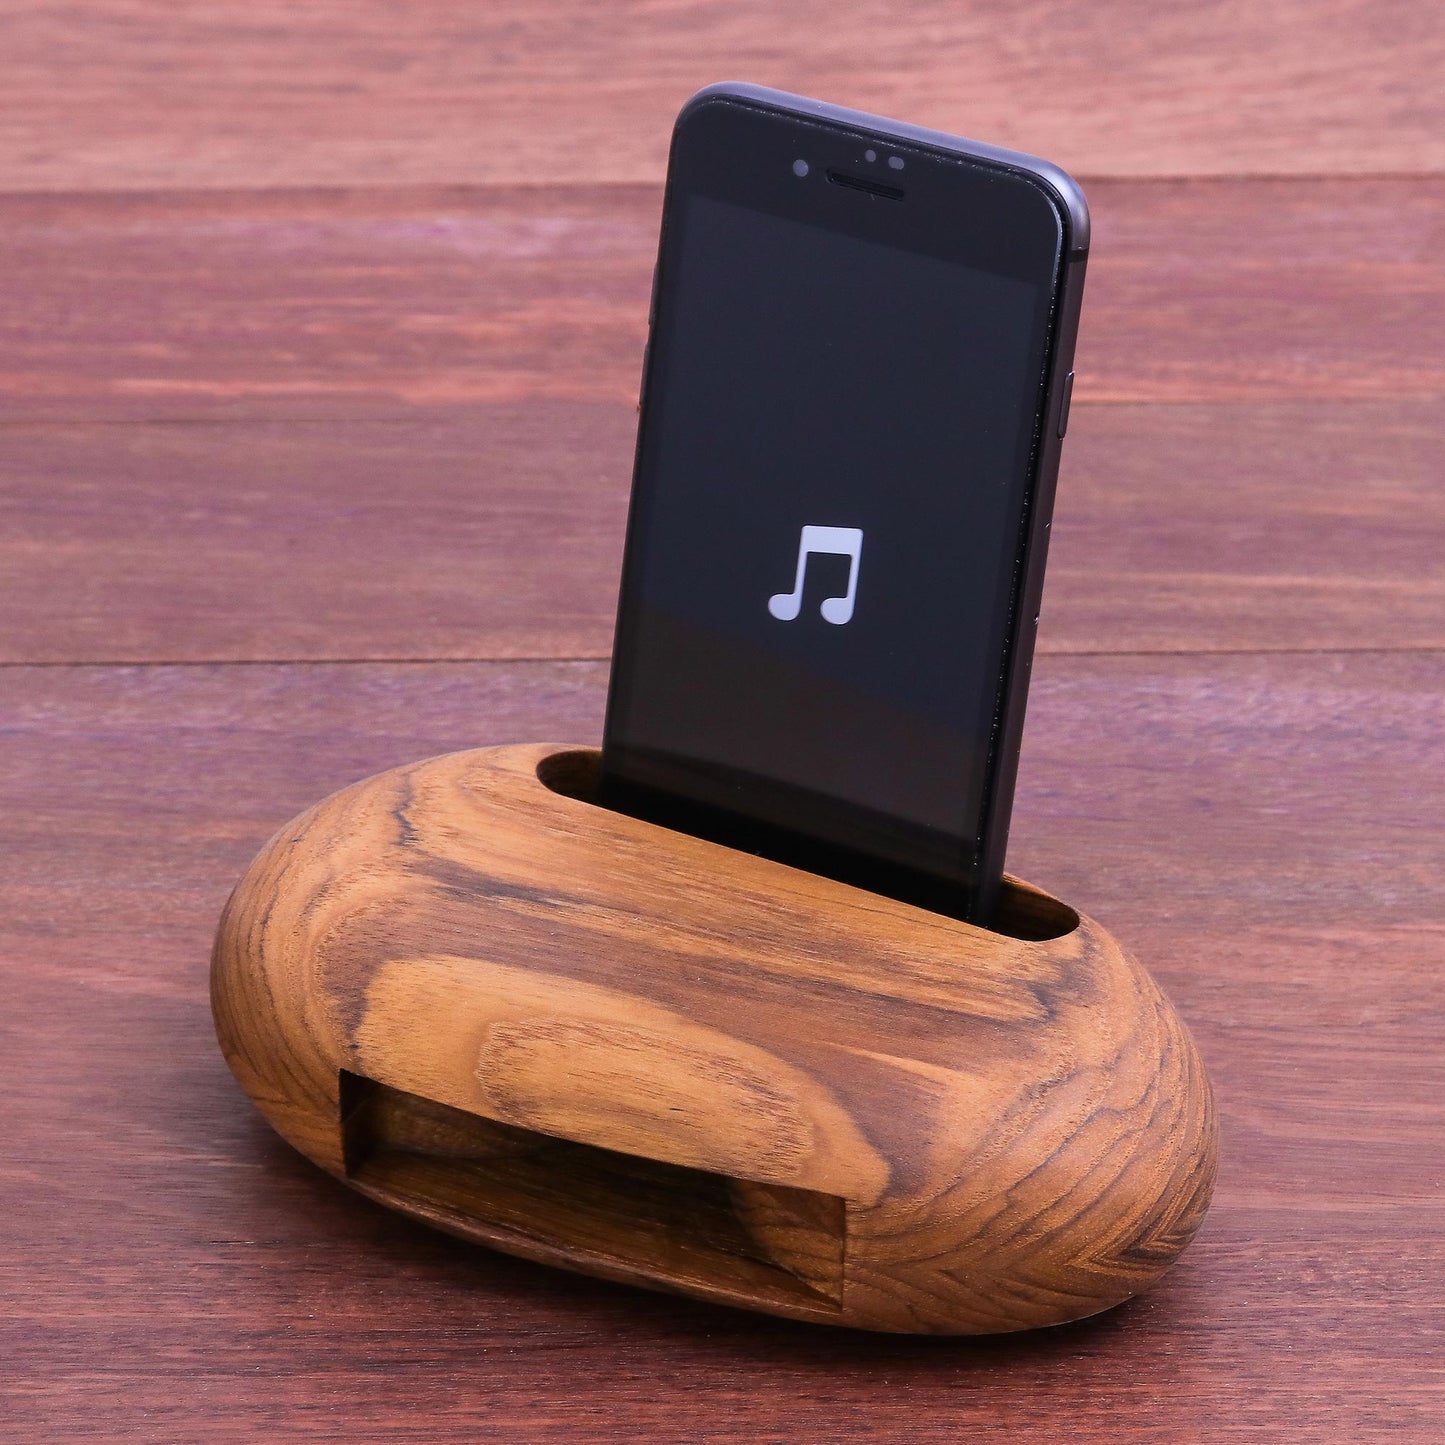 Rock Out Egg-Shaped Teak Wood Phone Speaker from Thailand